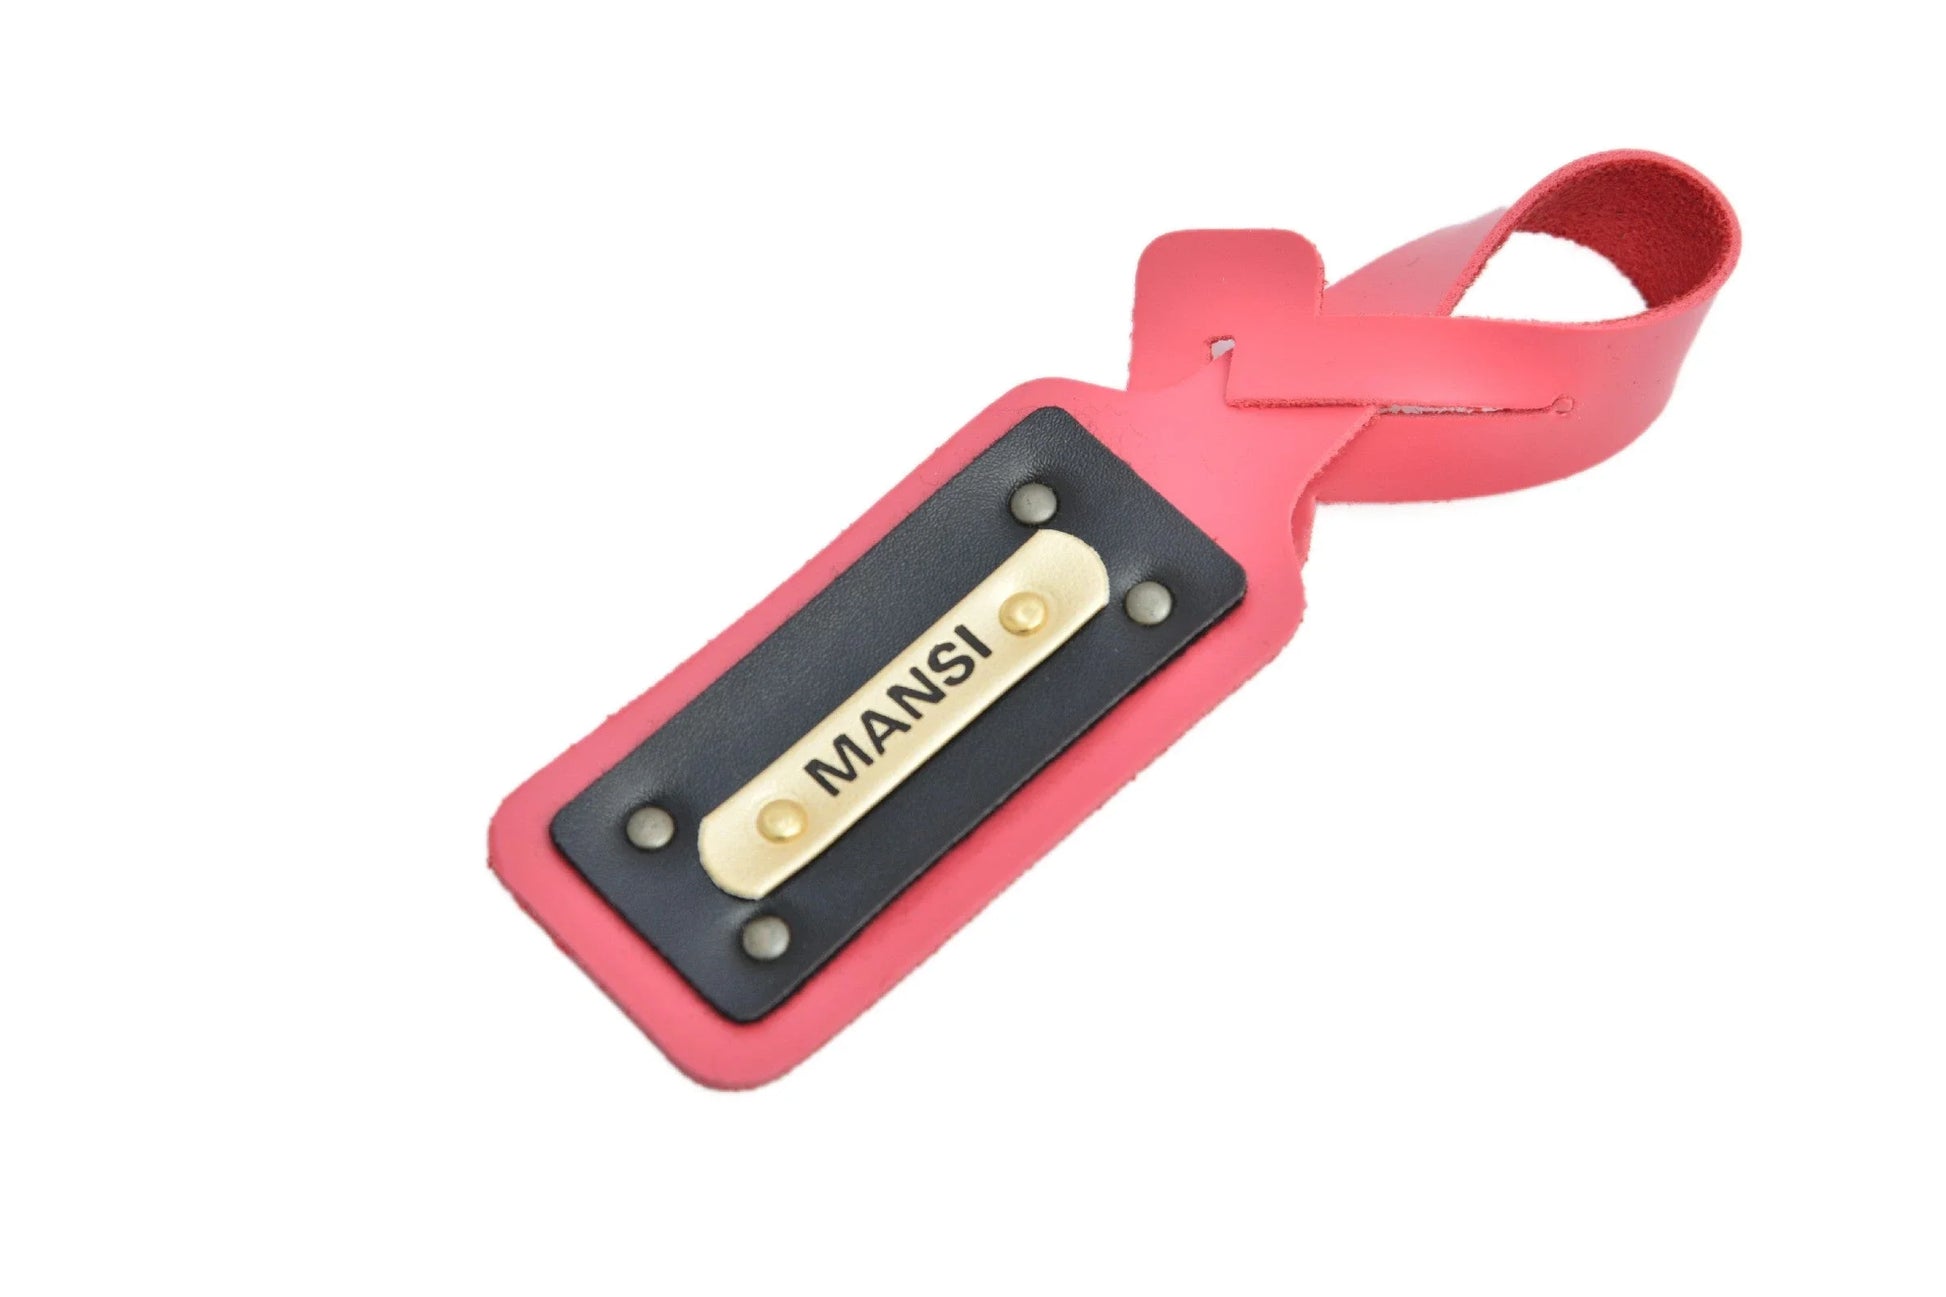 Stay Organized and Fashionable with the Sleek and Customized Luggage Tag.